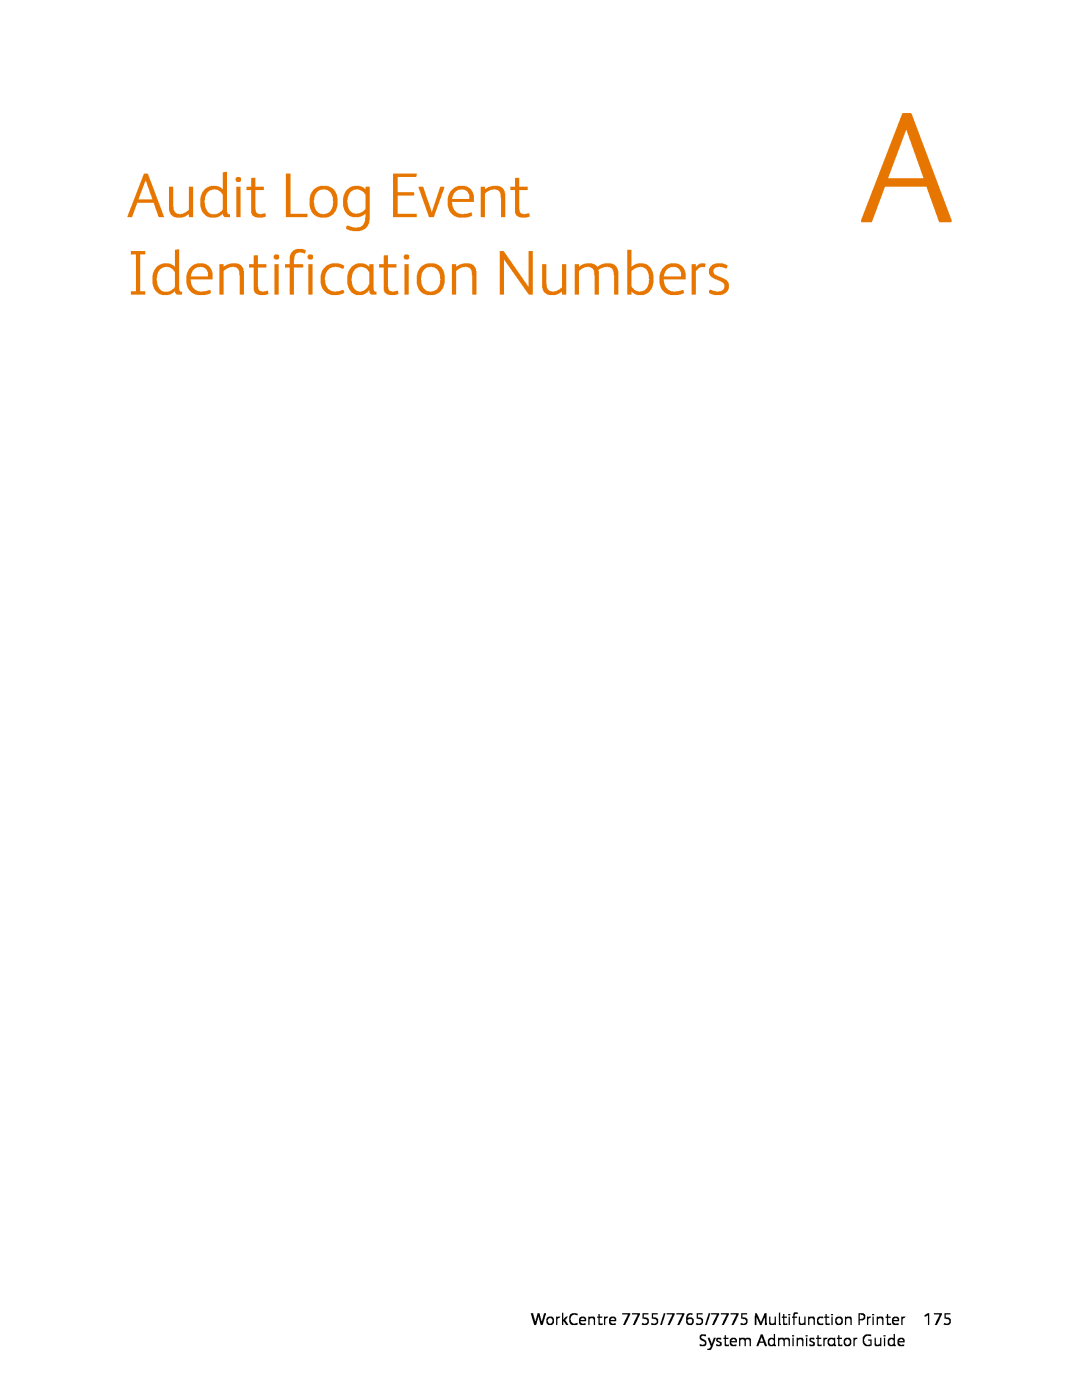 Xerox 7755, 7765, 7775 manual Audit Log Event, Identification Numbers 